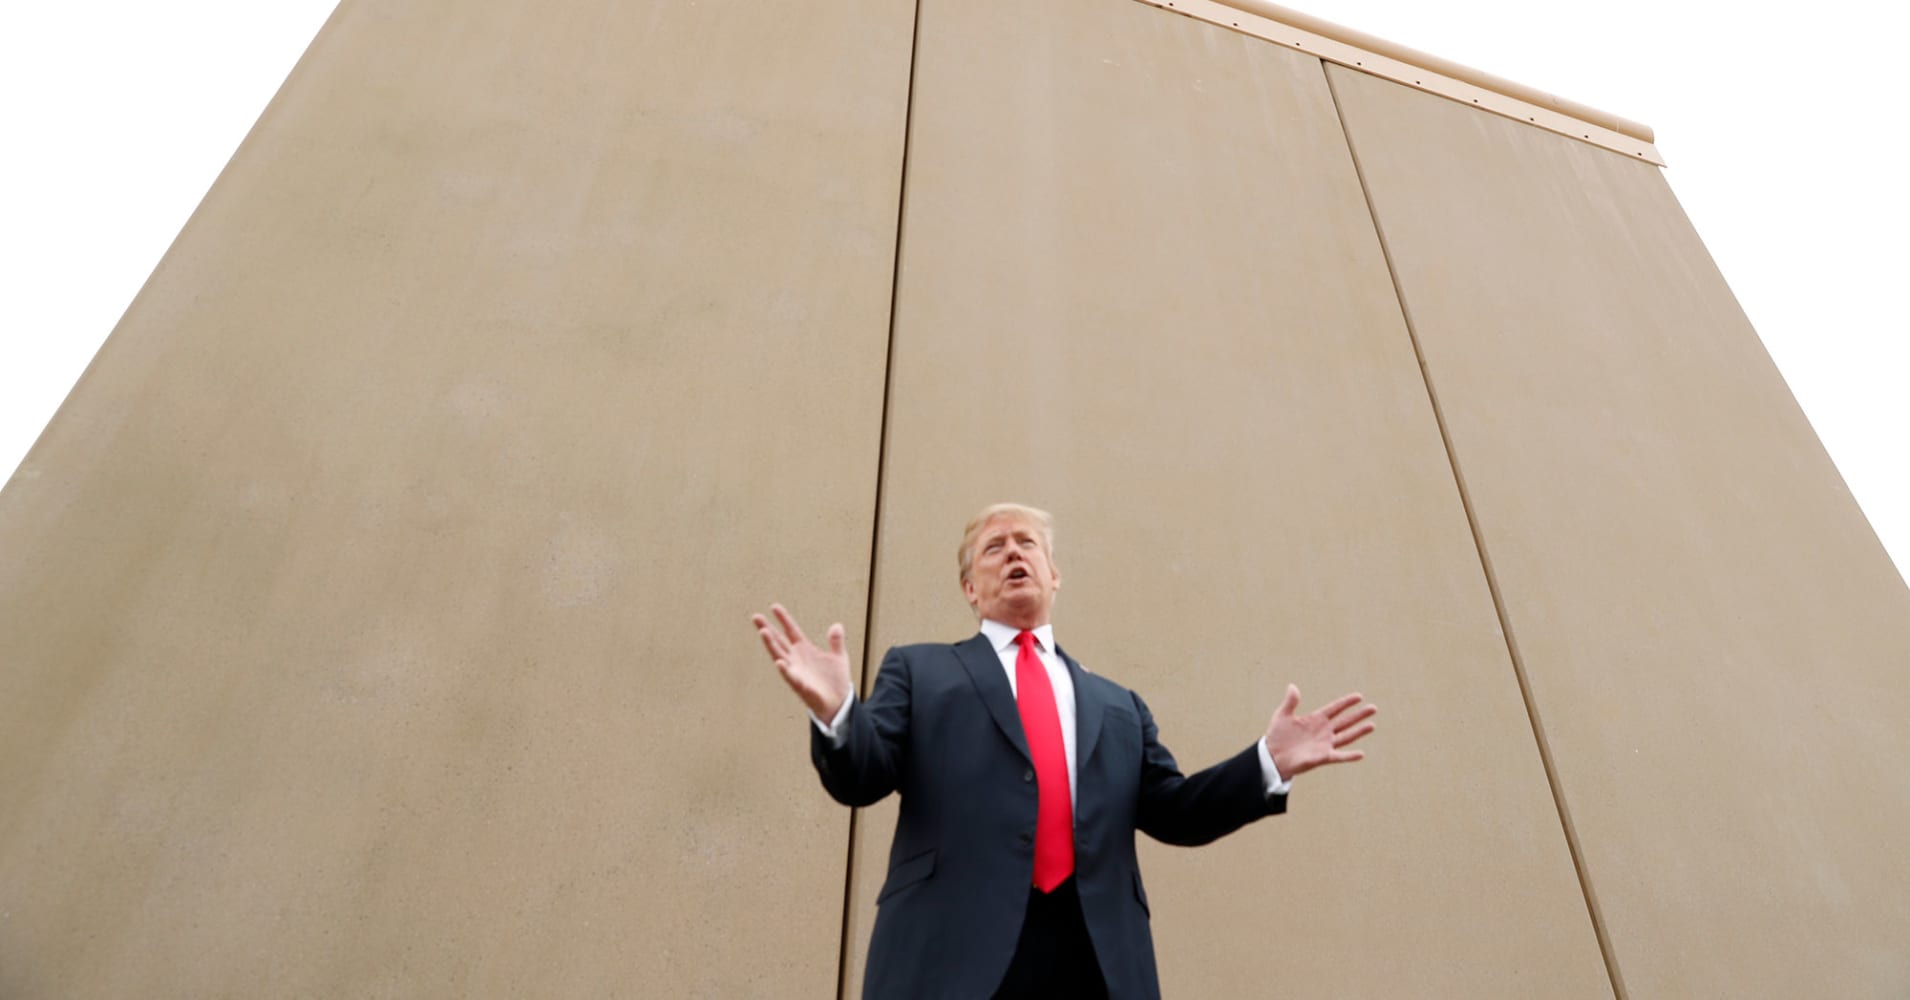 A battle over Trump's border wall could shut down major parts of the government